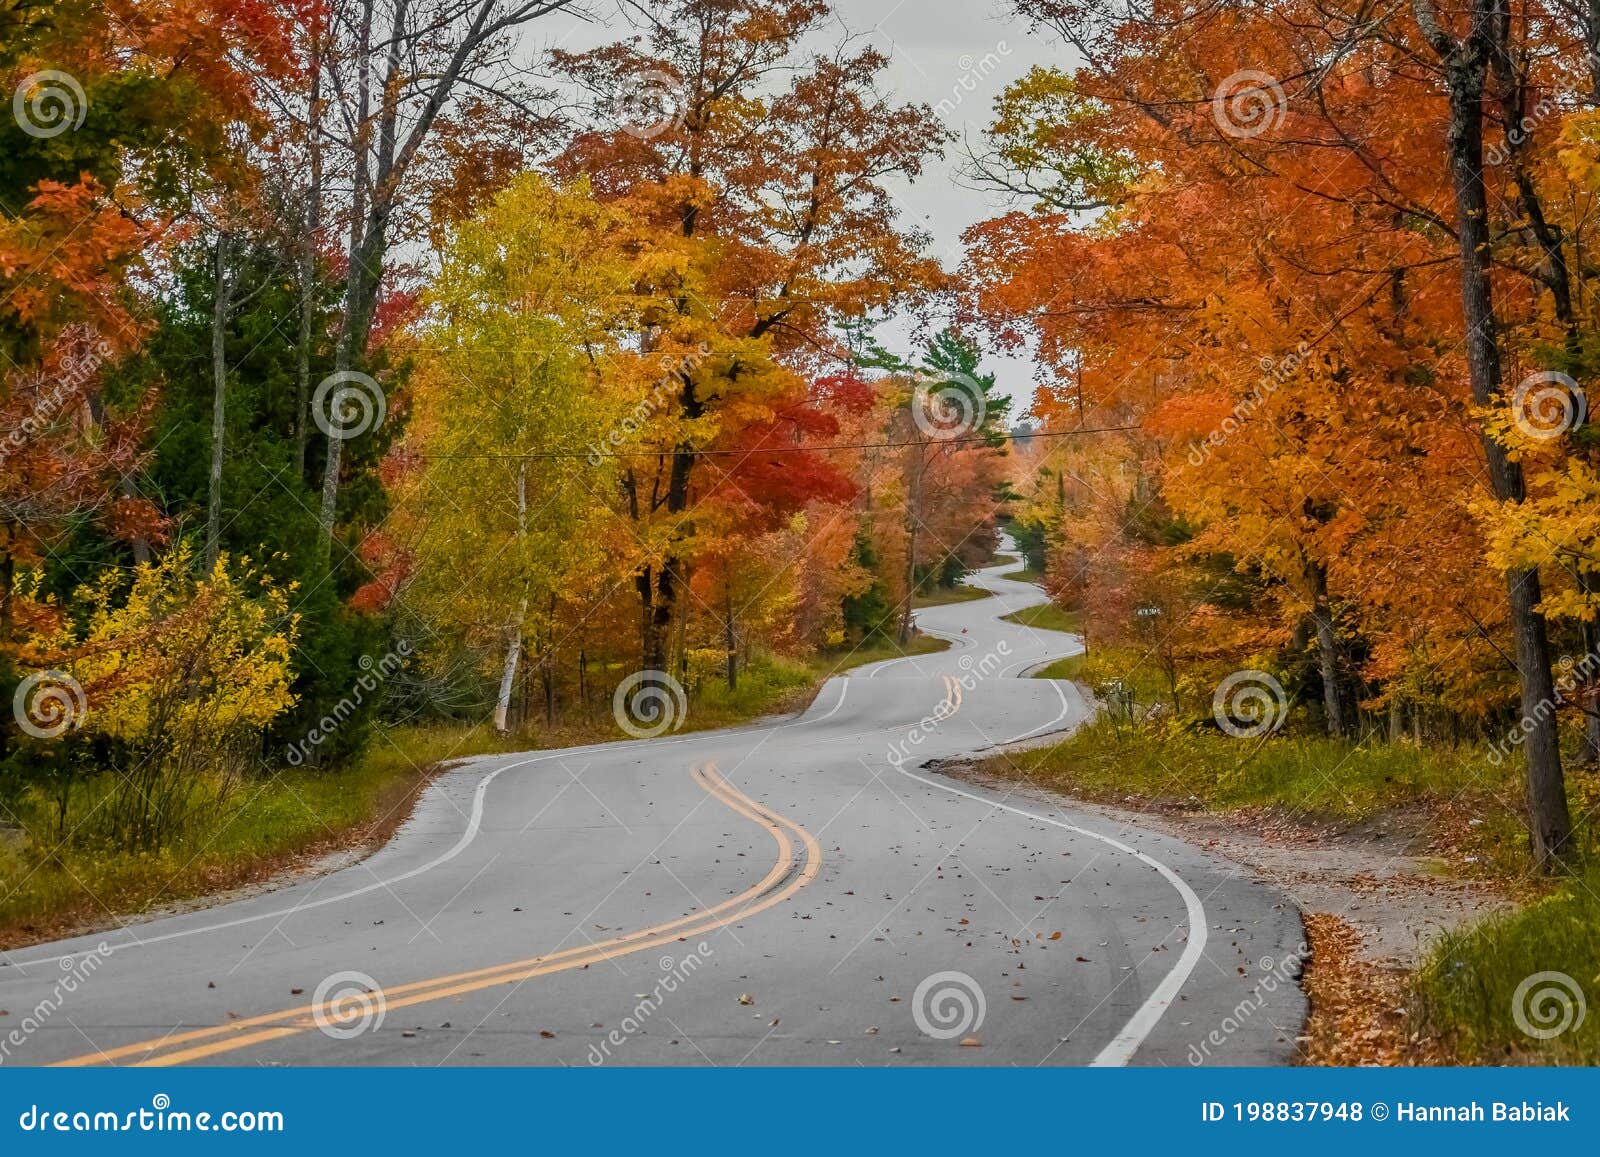 winding road, fall colors, door county, wi